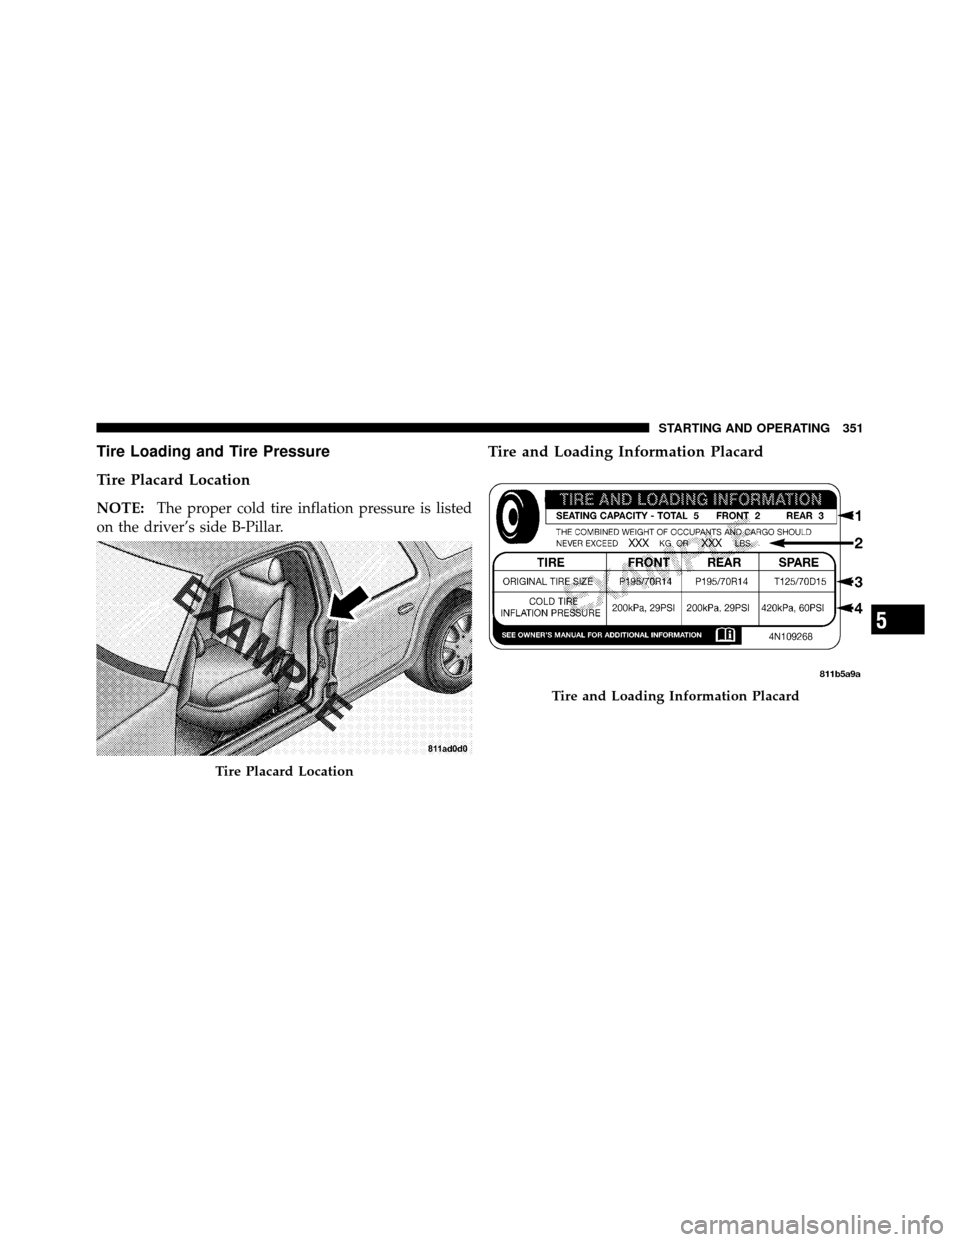 DODGE GRAND CARAVAN 2010 5.G Owners Manual 
Tire Loading and Tire Pressure
Tire Placard Location
NOTE:The proper cold tire inflation pressure is listed
on the driver’s side B-Pillar.
Tire and Loading Information Placard
Tire Placard Location